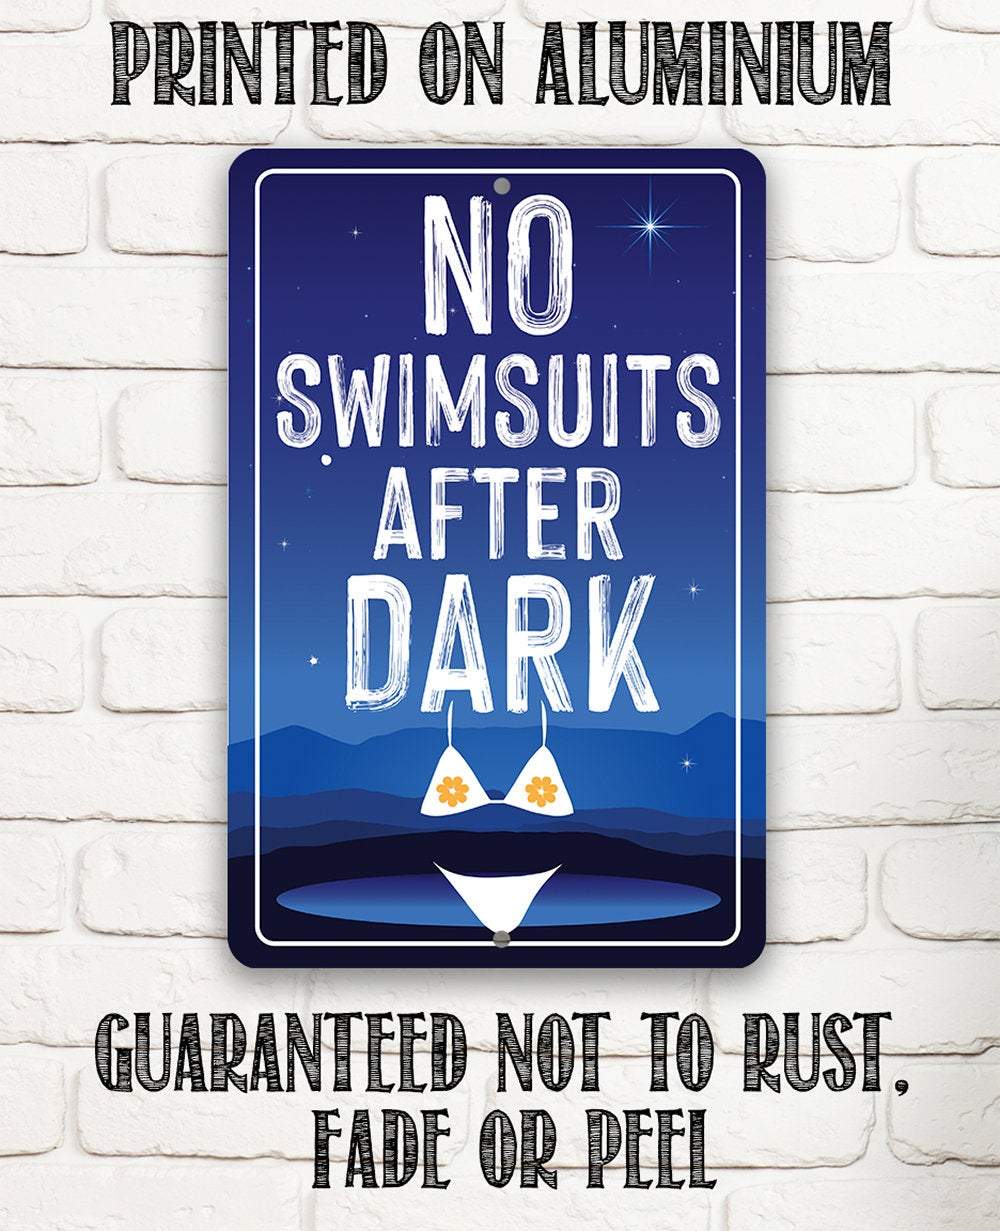 No Swimsuits After Dark - Metal Sign | Lone Star Art.